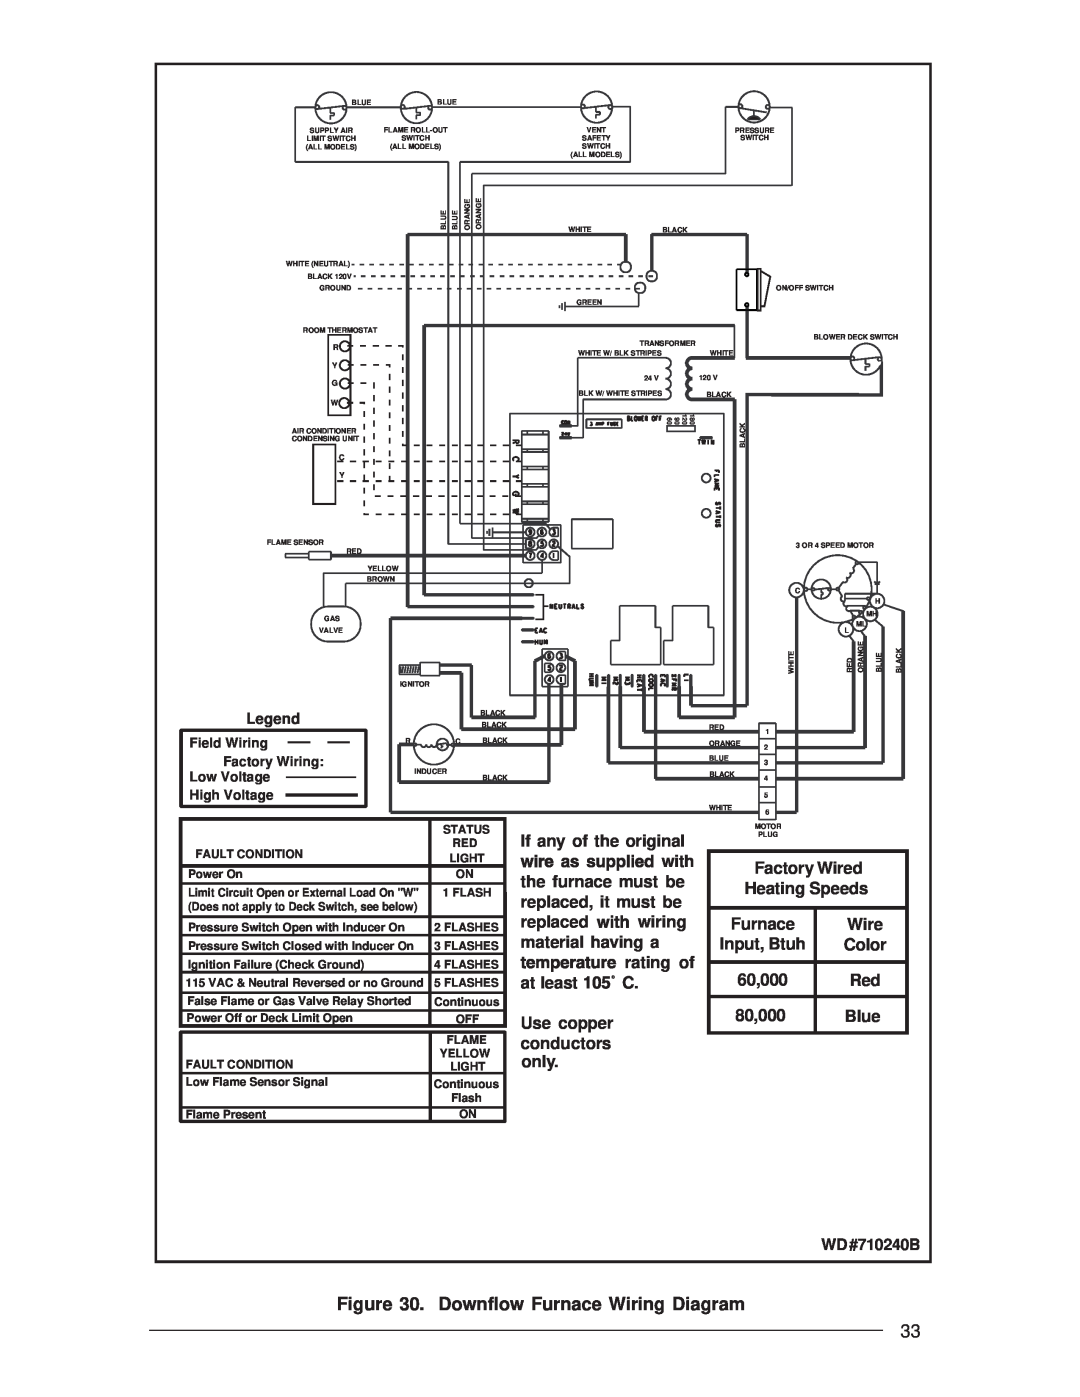 Nordyne M3RL Downflow Furnace Wiring Diagram, If any of the original, with, Factory Wired, the furnace must be, replaced 